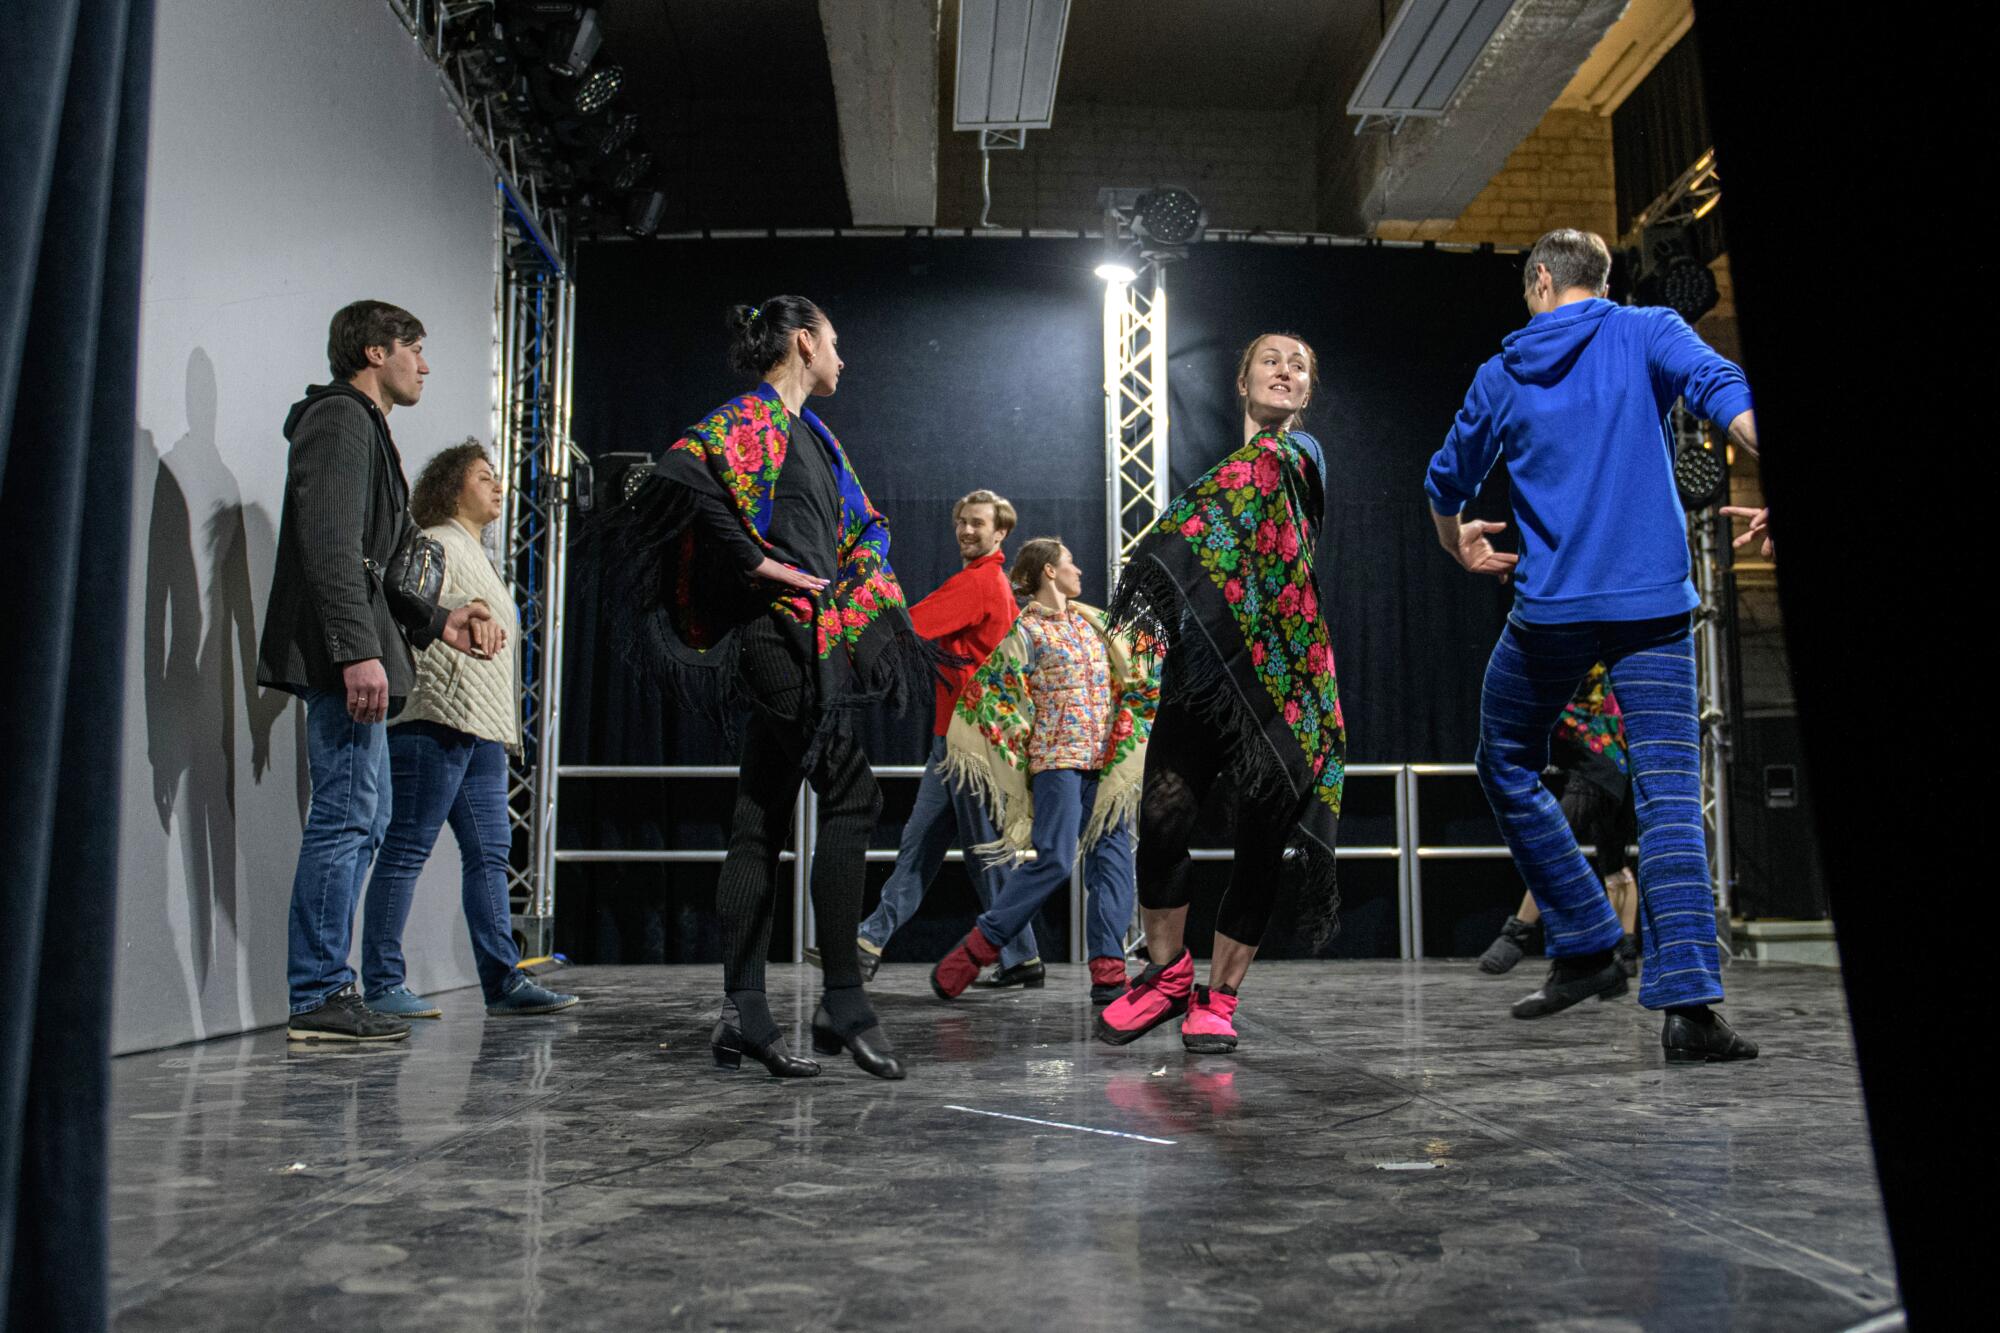 People in colorful clothing take part in a rehearsal.